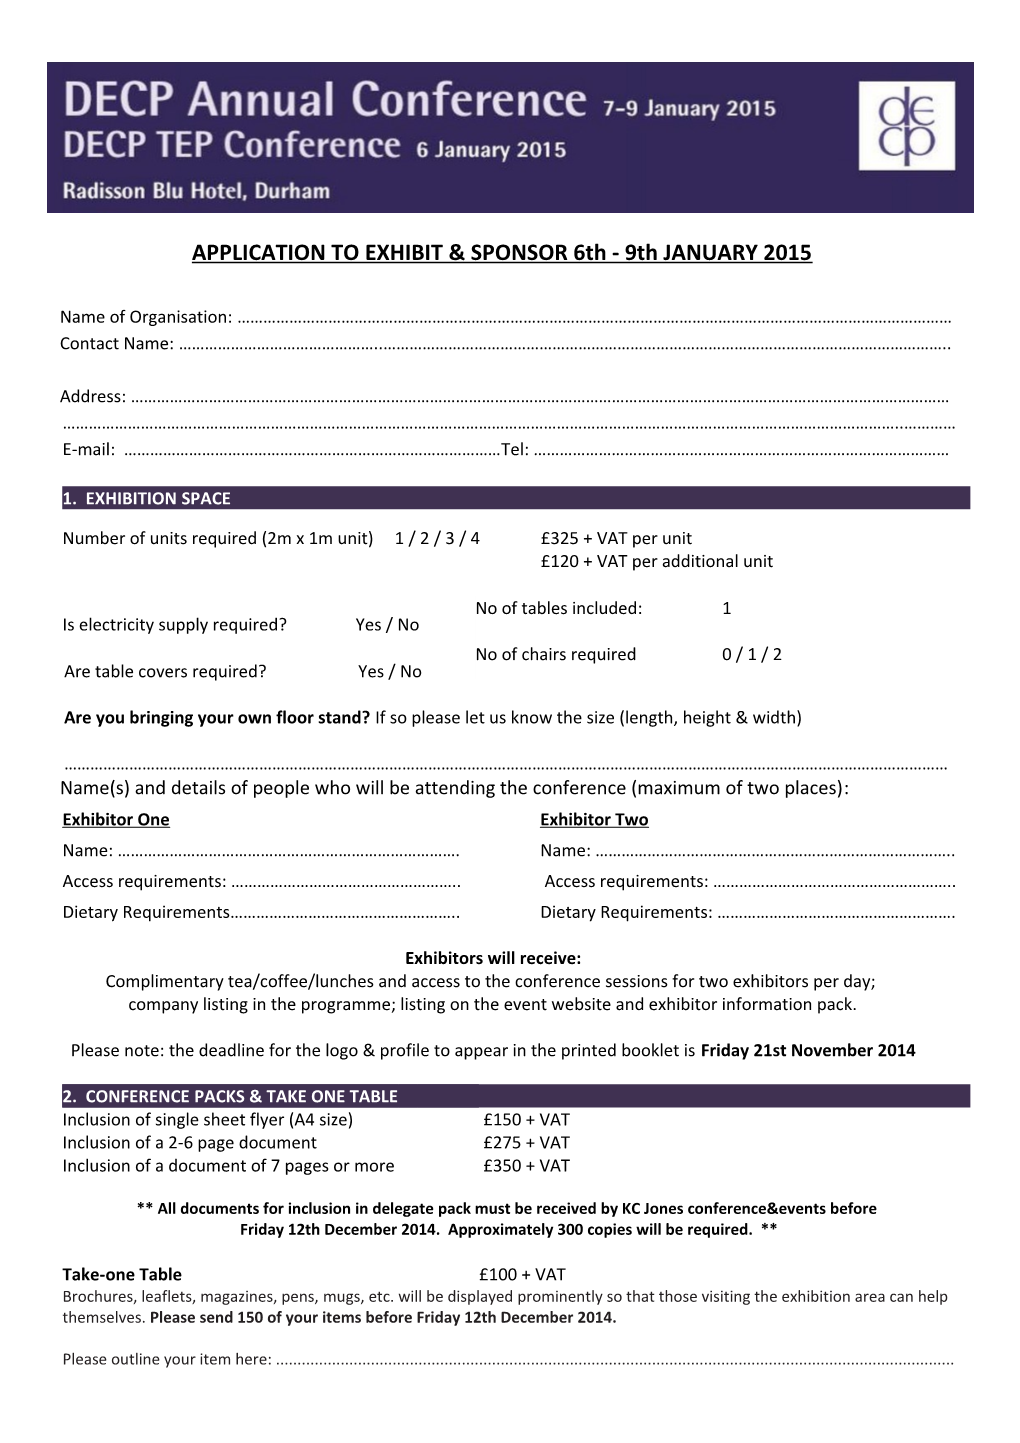 APPLICATION to EXHIBIT & Sponsor6th - 9Th JANUARY 2015